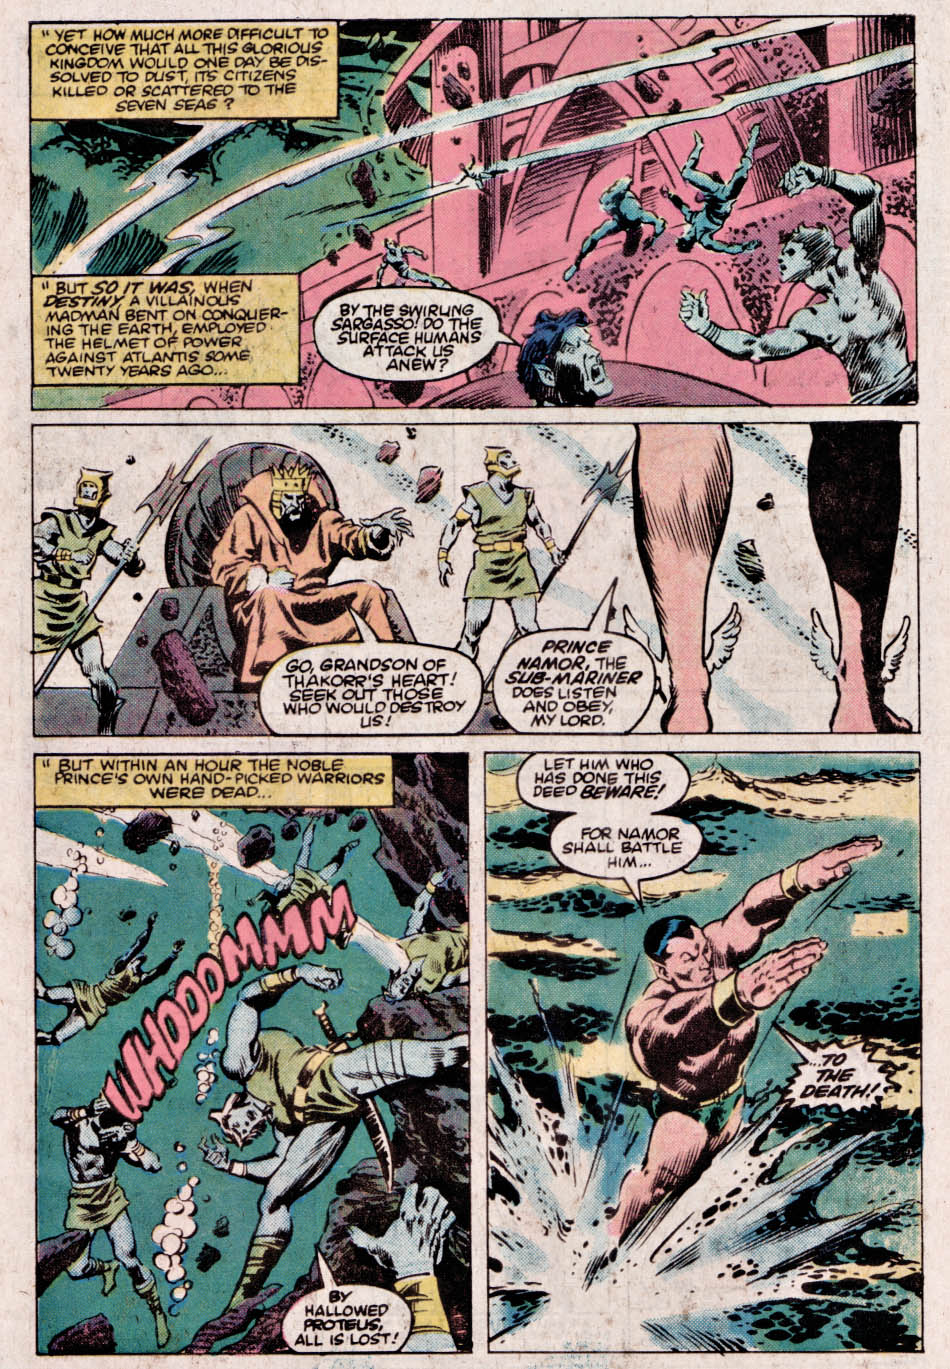 What If? (1977) issue 41 - The Sub-mariner had saved Atlantis from its destiny - Page 4